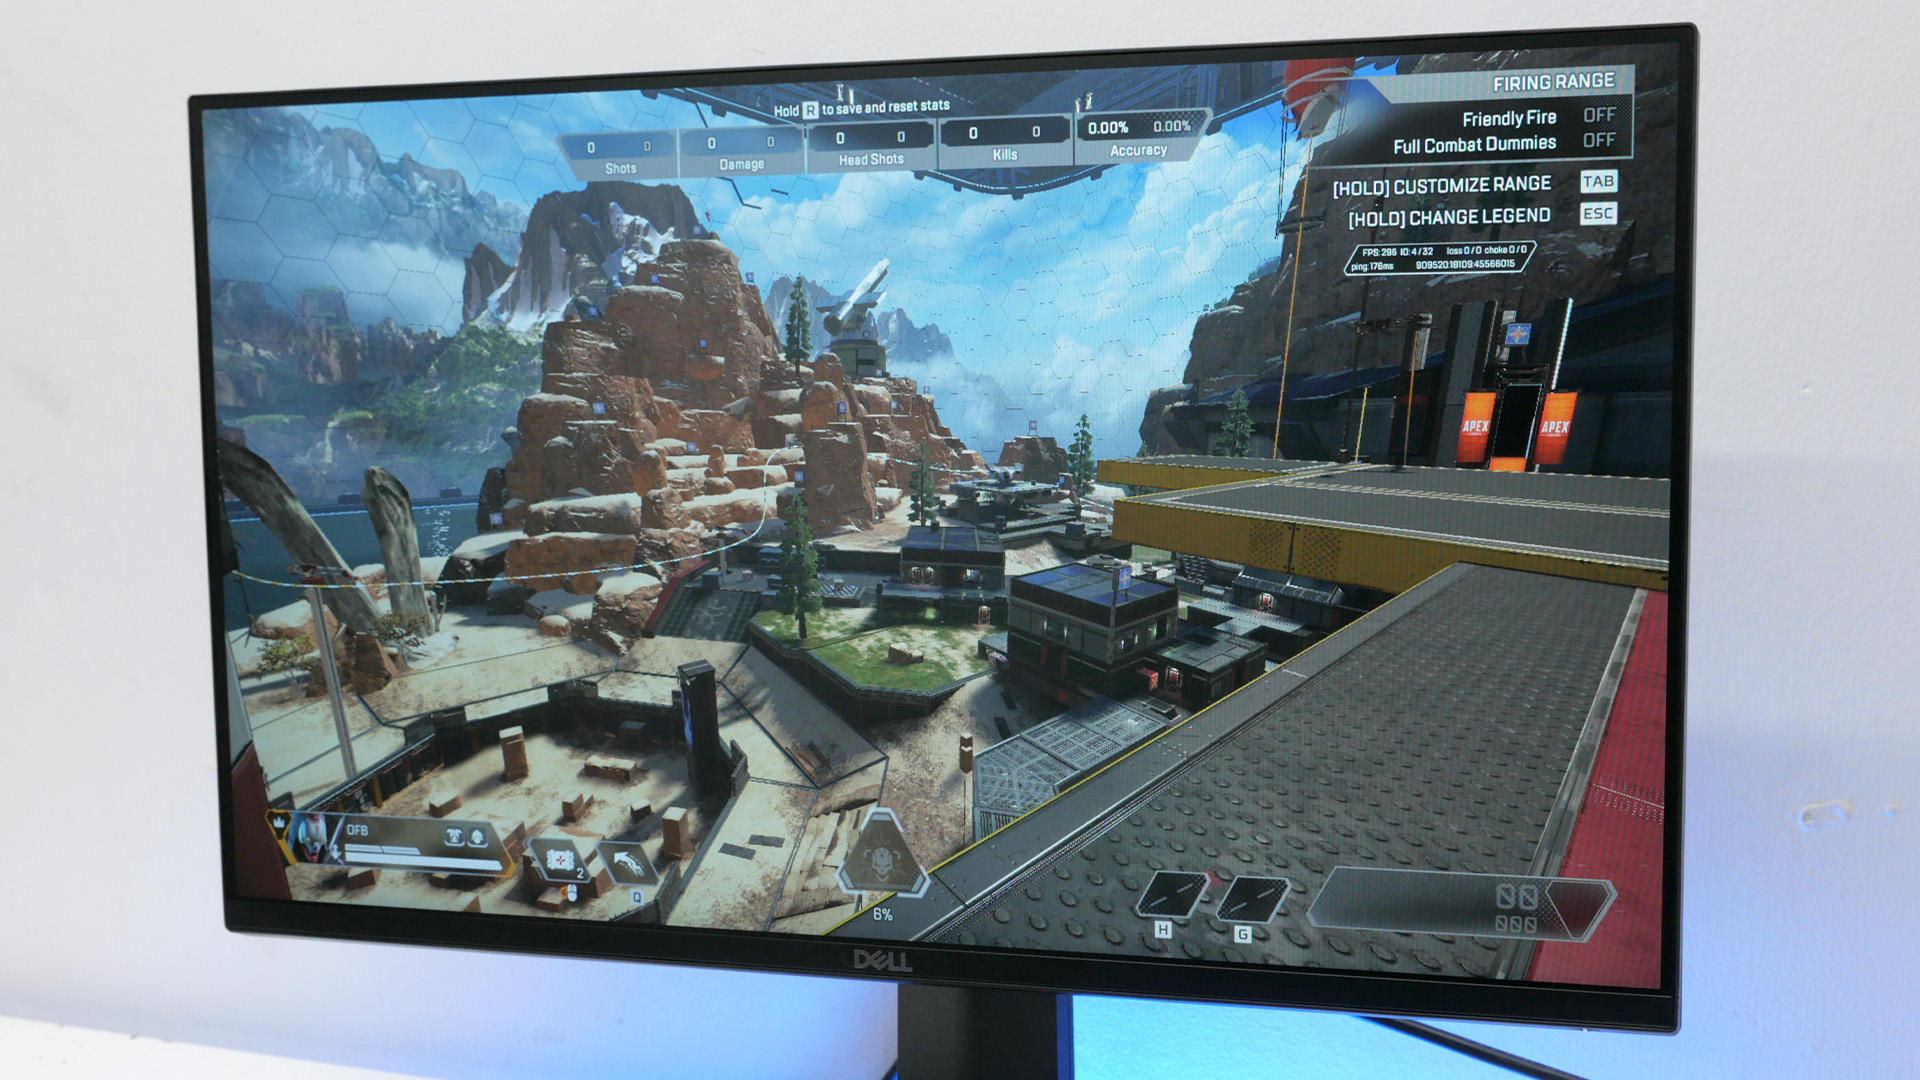 Dell G2524H review image showing the monitor running a game with a modern city in it.